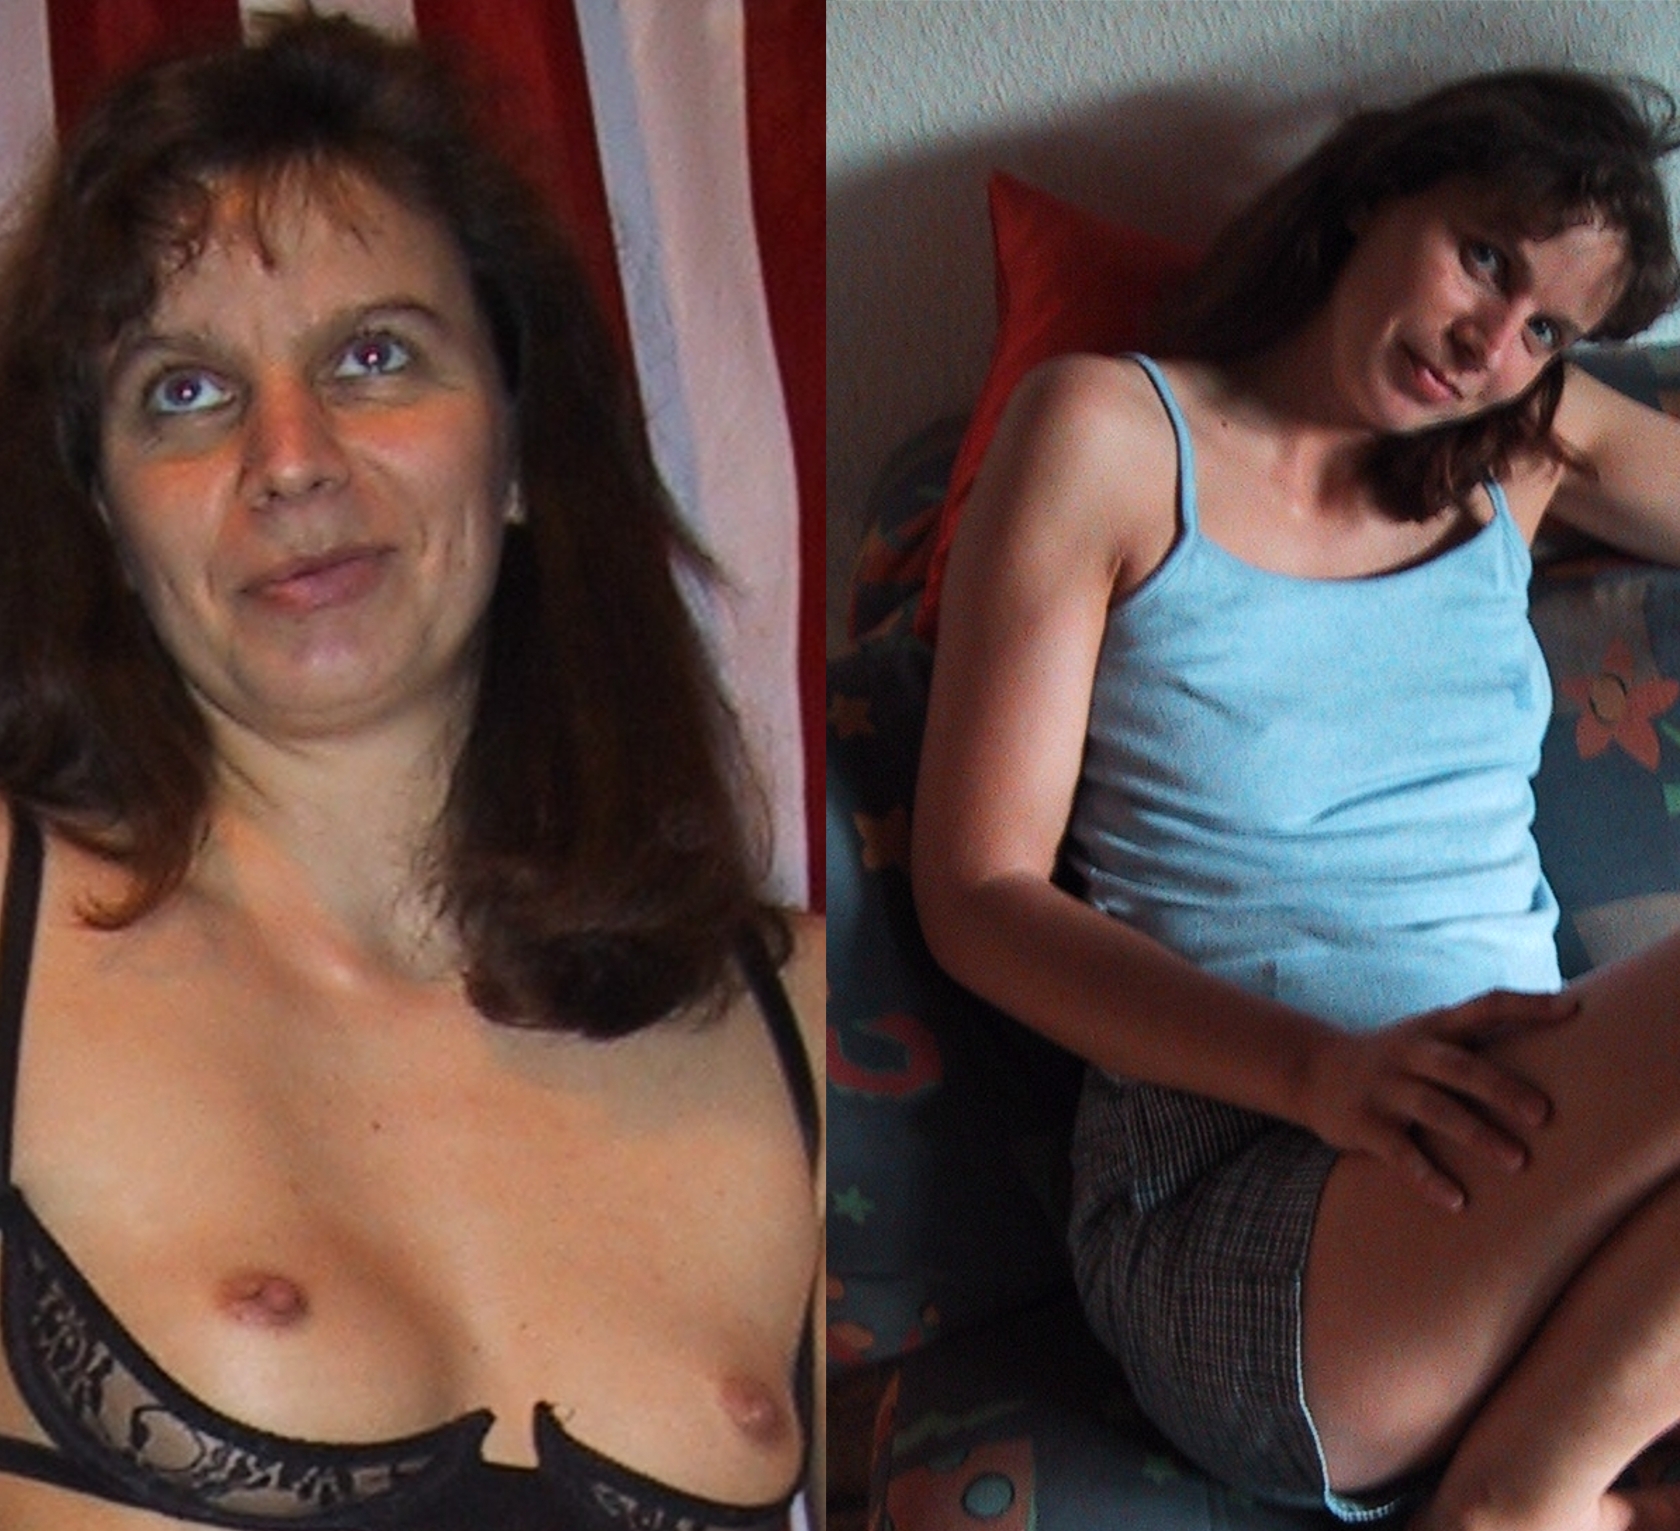 Bettina Riedel from Hannover nude and clothed - Bettina Riedel from Hannover clothed unclothed 057 Porn pic